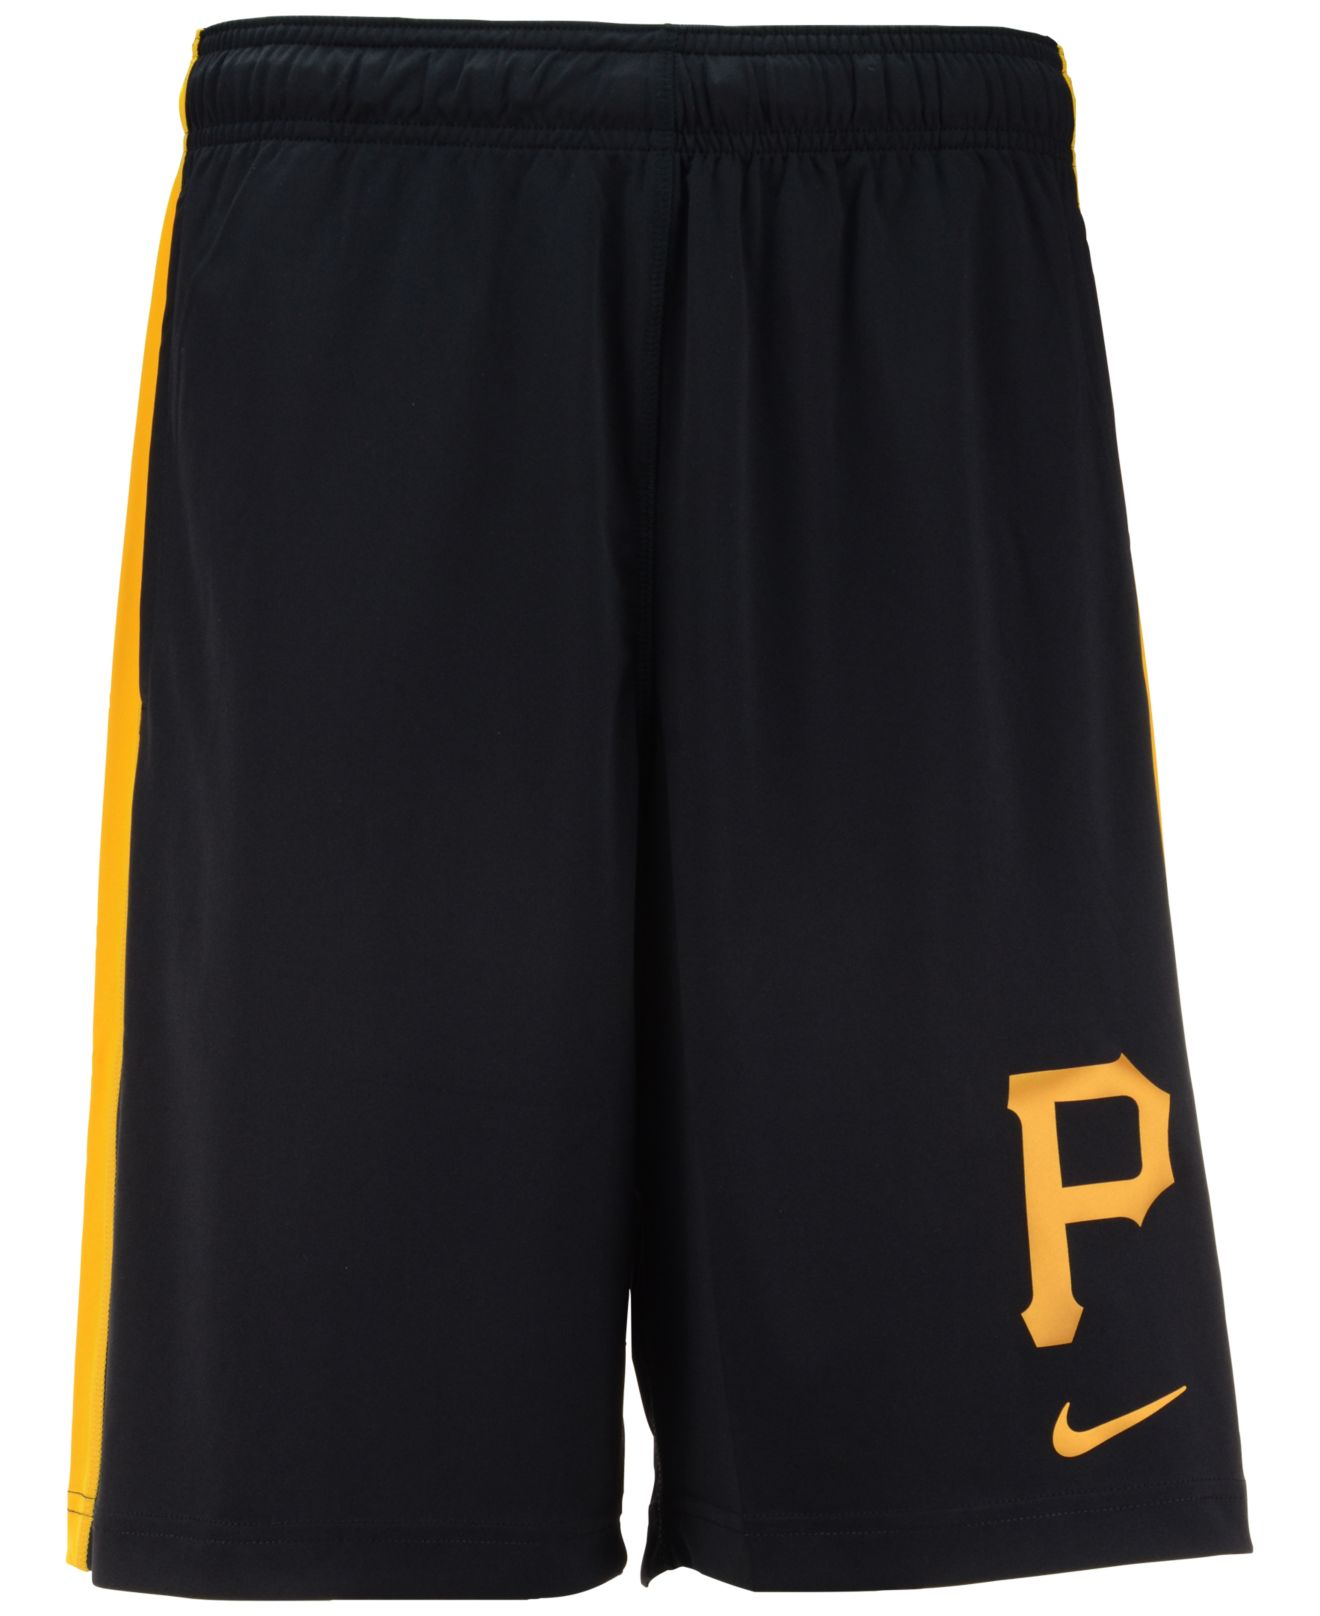 Lyst - Nike Men's Pittsburgh Pirates Fly Shorts in Black for Men